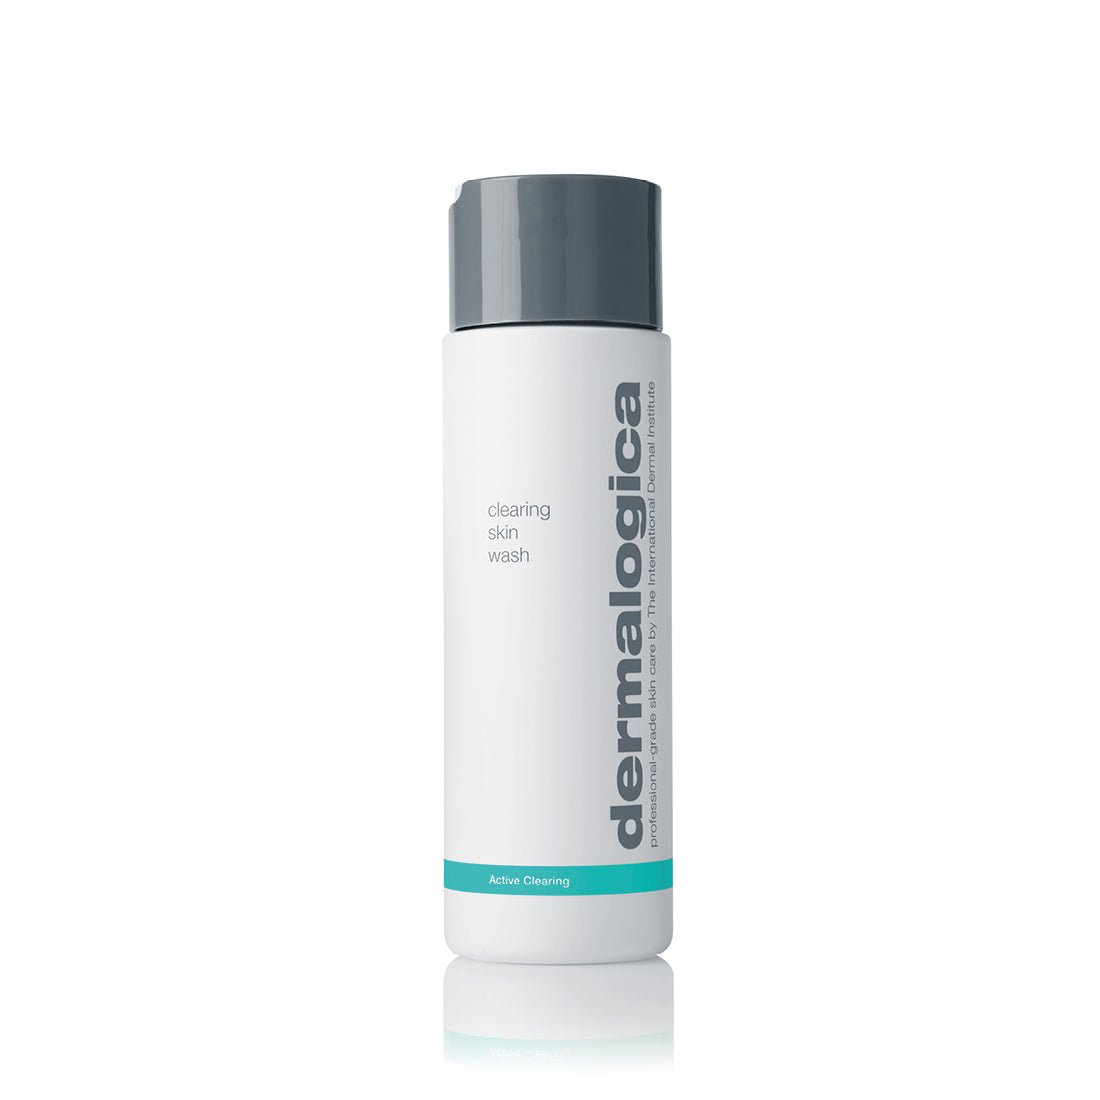 Dermalogica Clearing Skin Wash - Heaven Therapy Skincare (7156821917856)